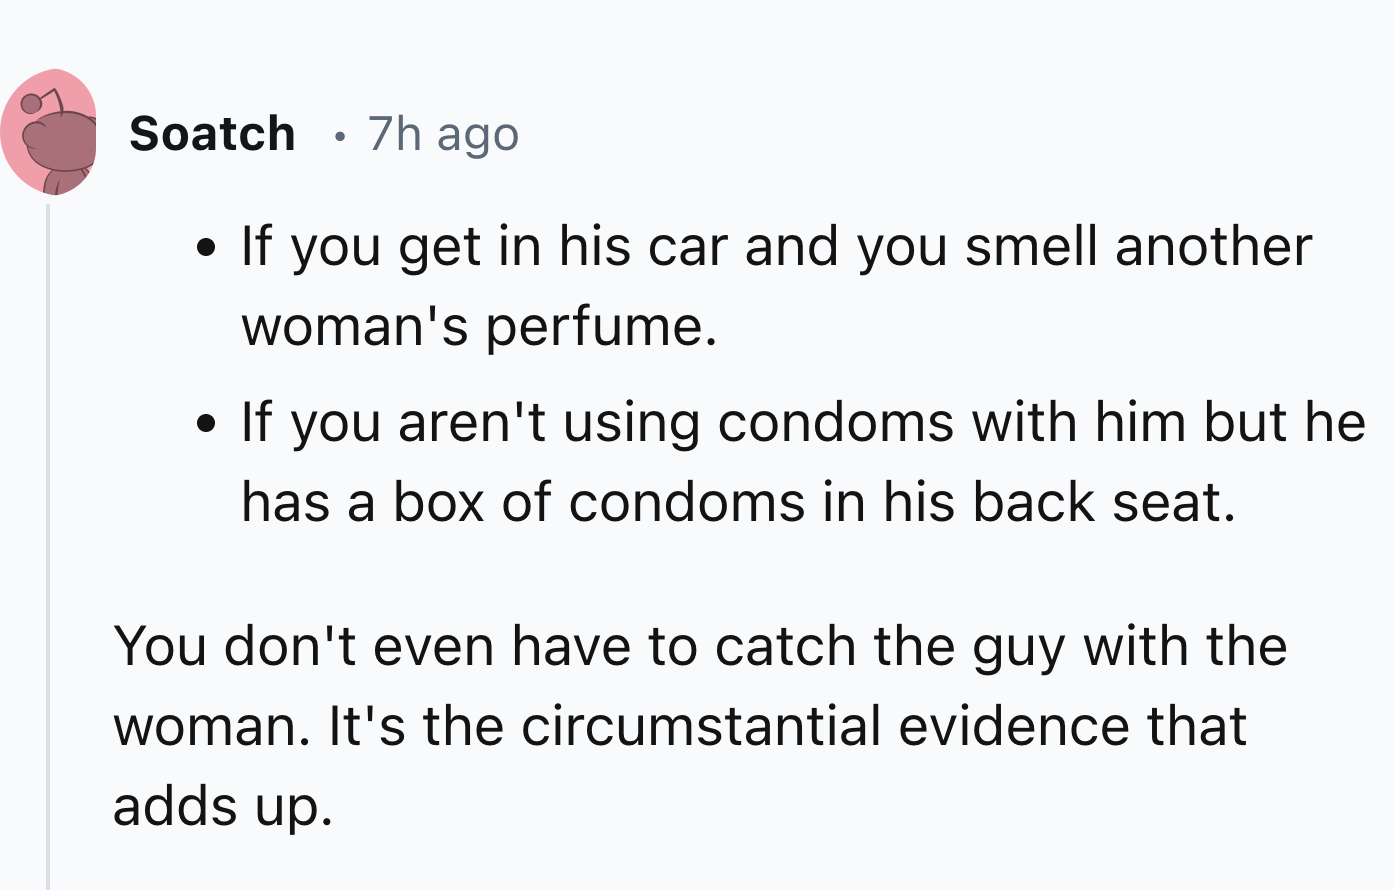 circle - Soatch 7h ago If you get in his car and you smell another woman's perfume. If you aren't using condoms with him but he has a box of condoms in his back seat. You don't even have to catch the guy with the woman. It's the circumstantial evidence th